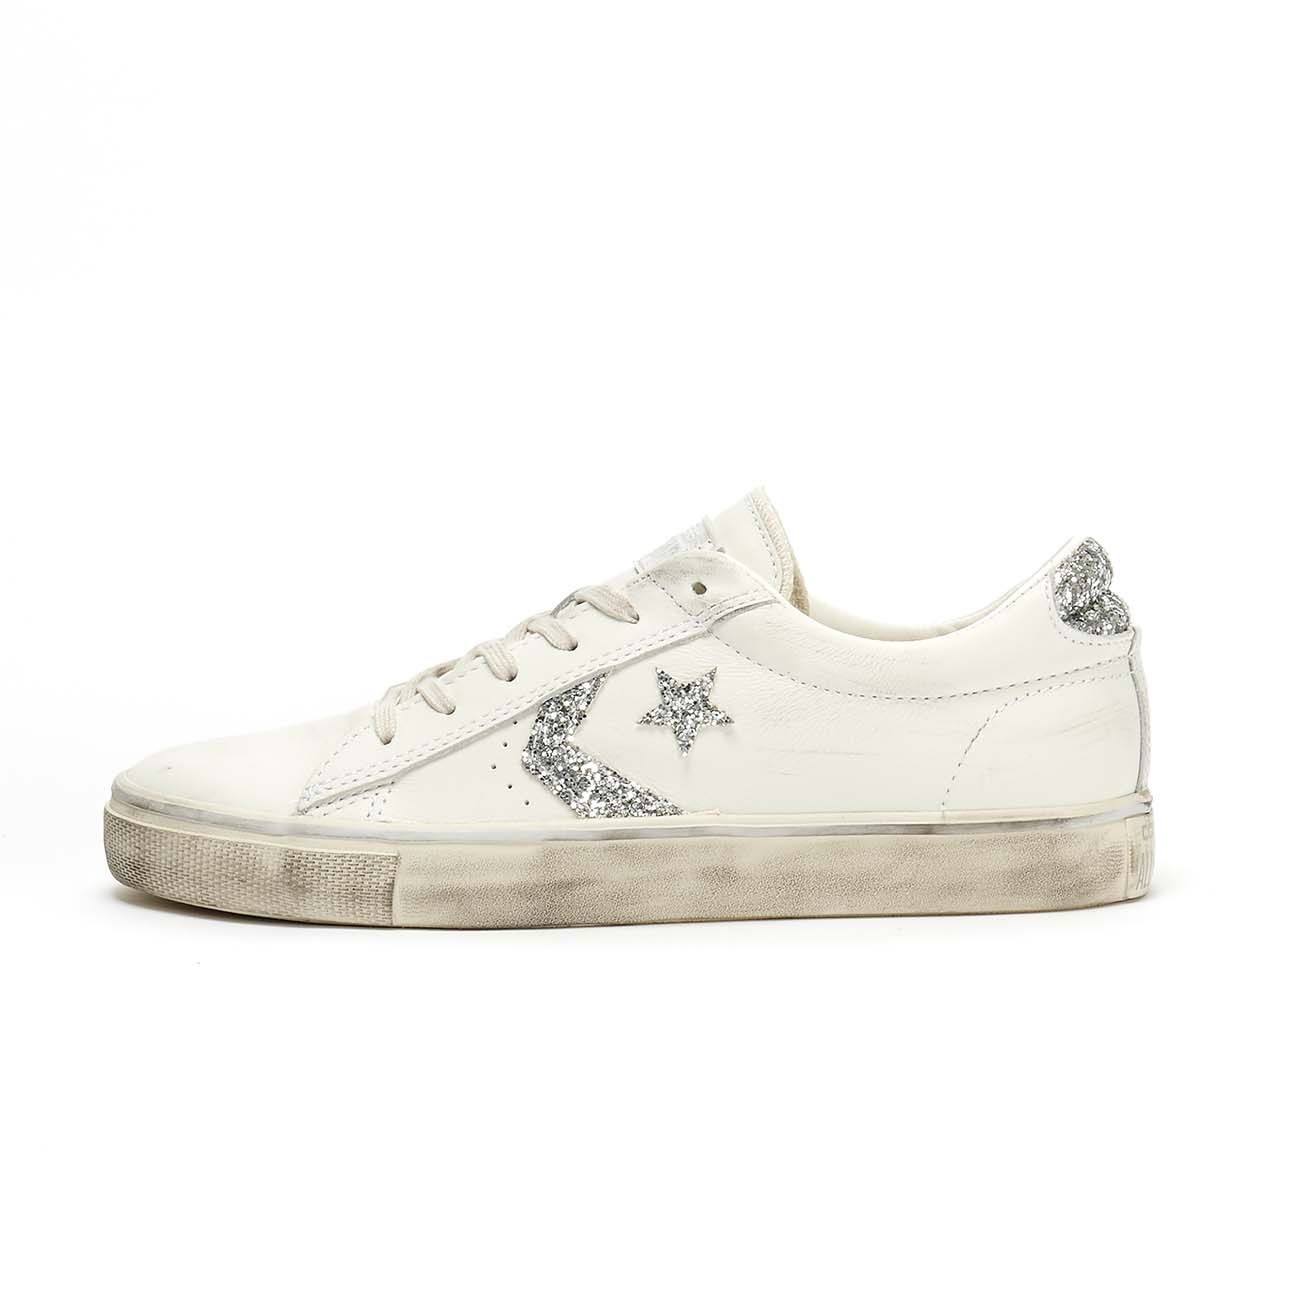 CONVERSE SNEAKERS PRO LEATHER VULC DISTRESSED OX Women White ... صور تاهو